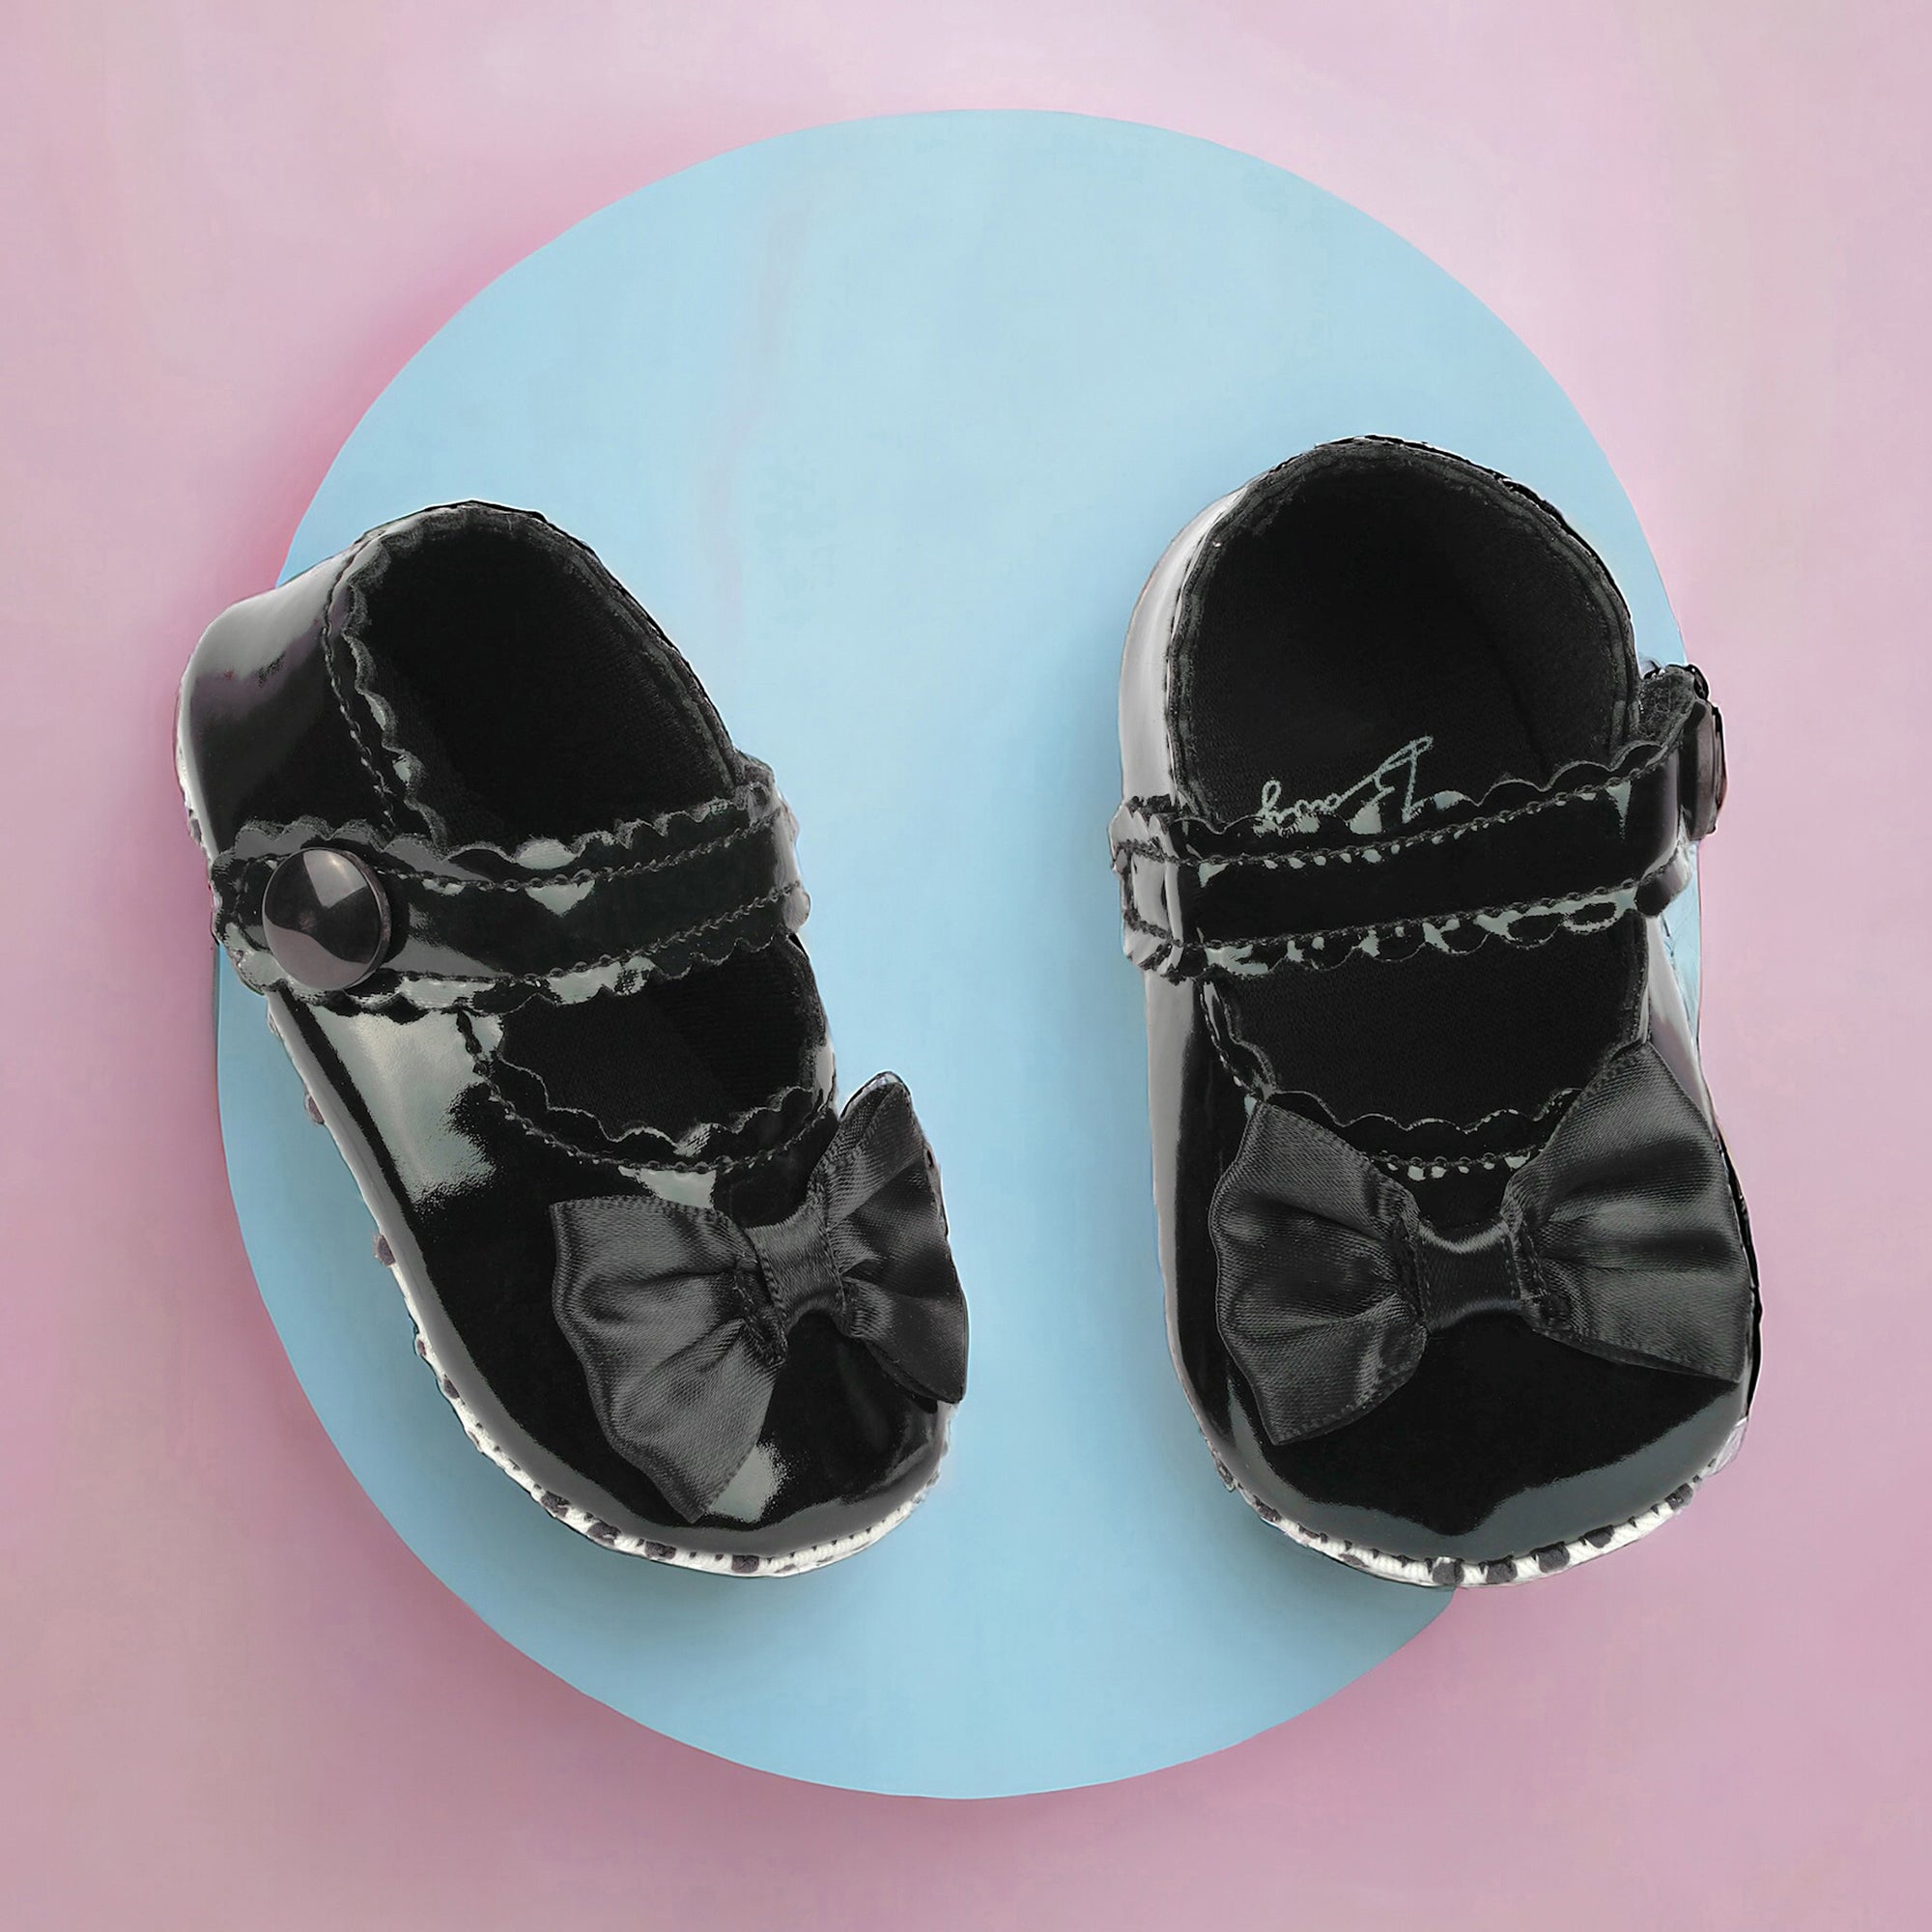 Baby Moo Bow Velcro Strap Patent Leather Anti-Skid Ballerina Booties - Black